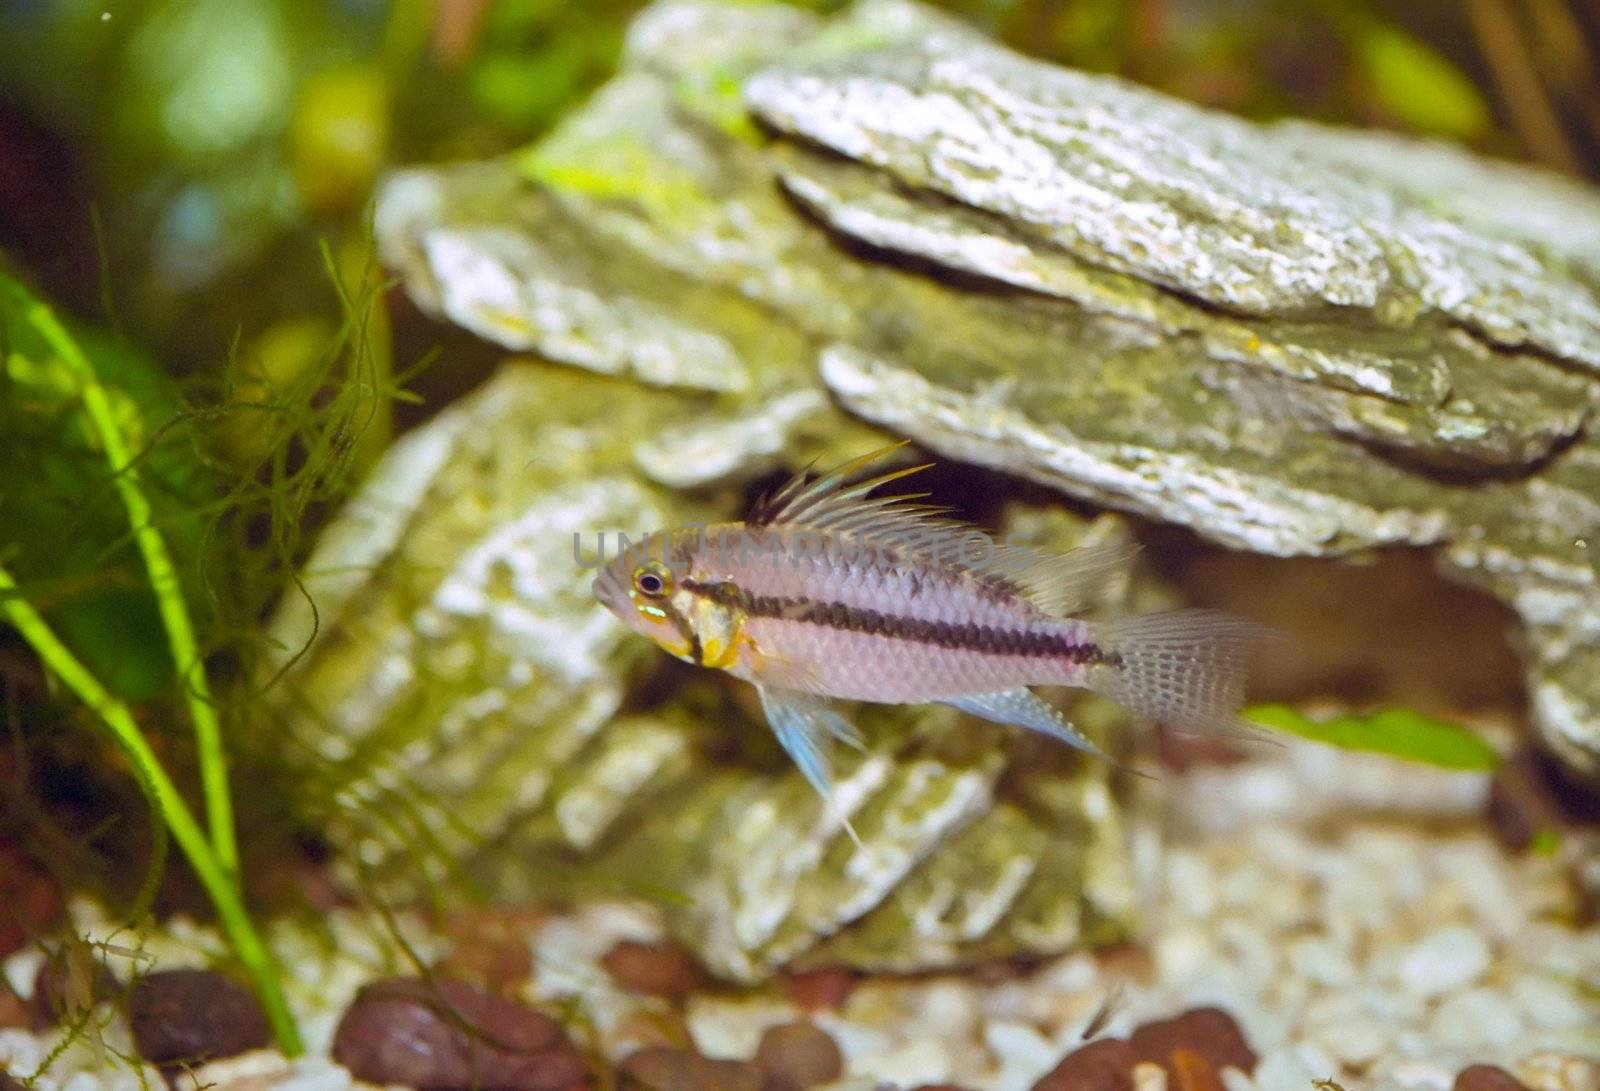 Apistogramma cacatuoides by melastmohican